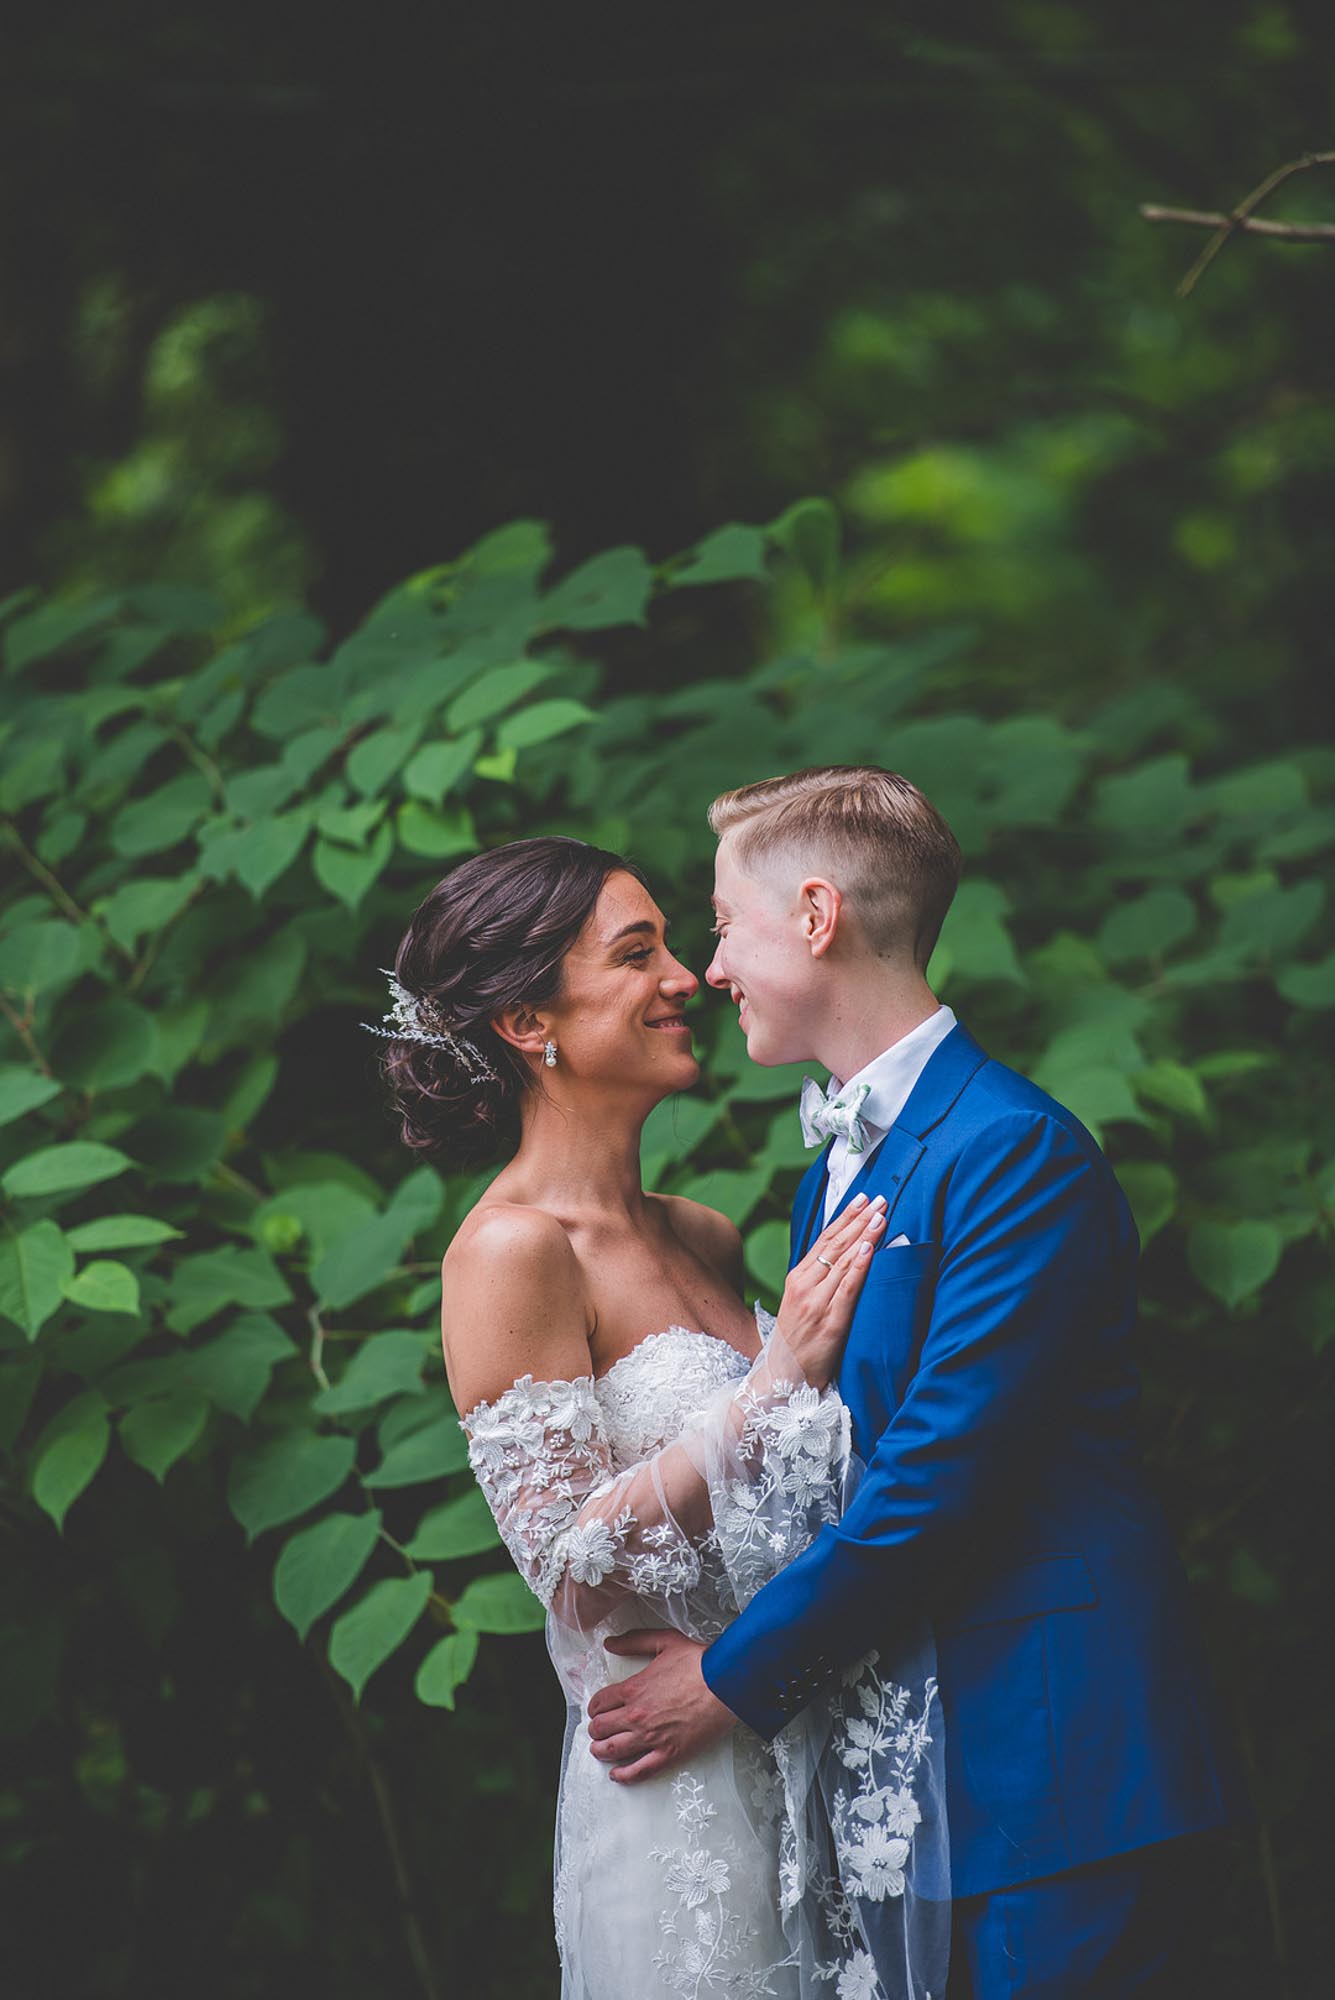 Philadelphia garden wedding with bold blue suit and cape sleeve gown | Beau Monde Originals | Featured on Equally Wed, the leading LGBTQ+ wedding magazine